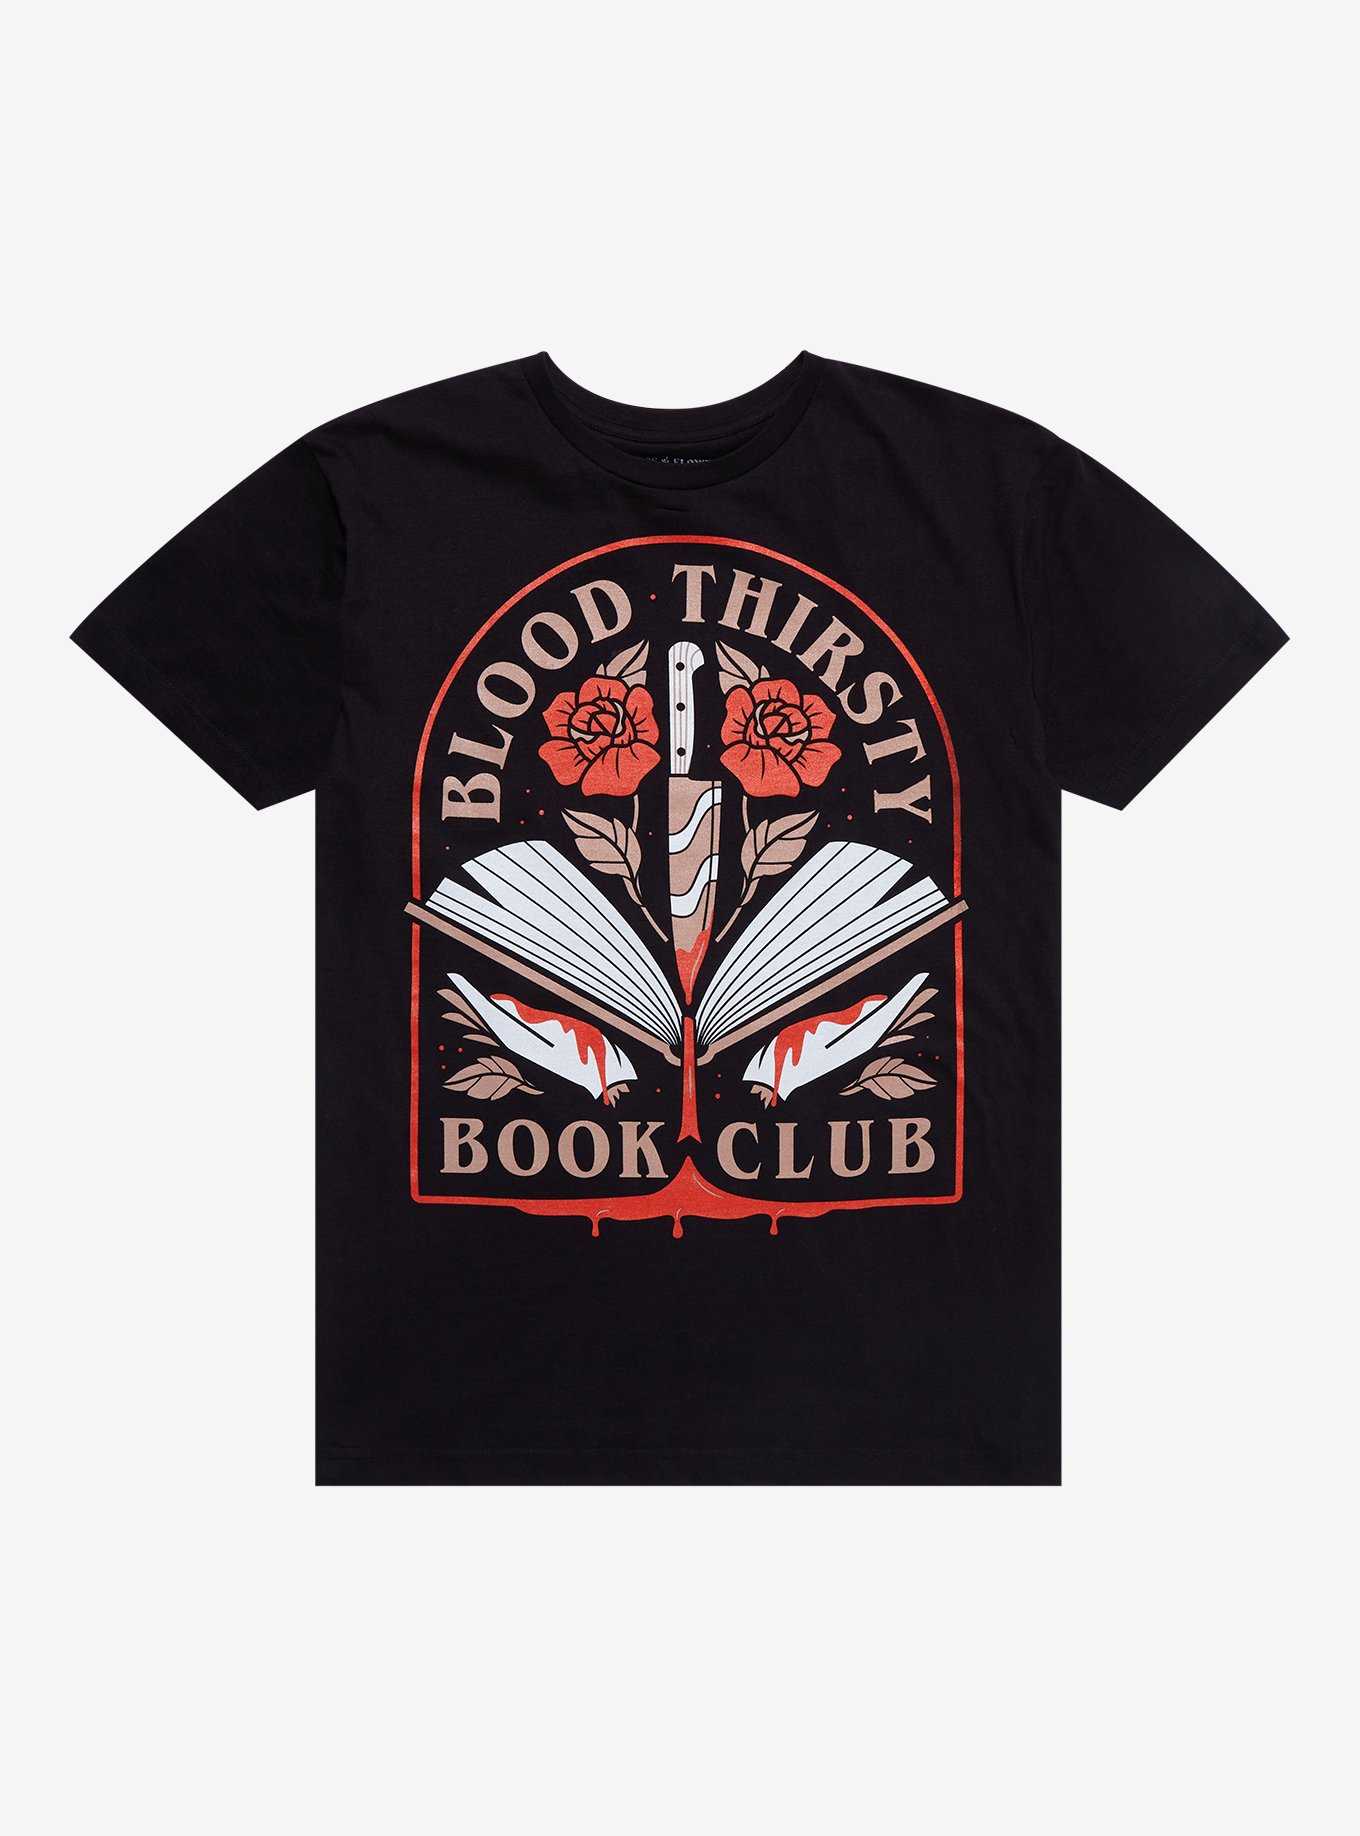 Bloodthirsty Book Club T-Shirt By Forensics & Flowers, , hi-res